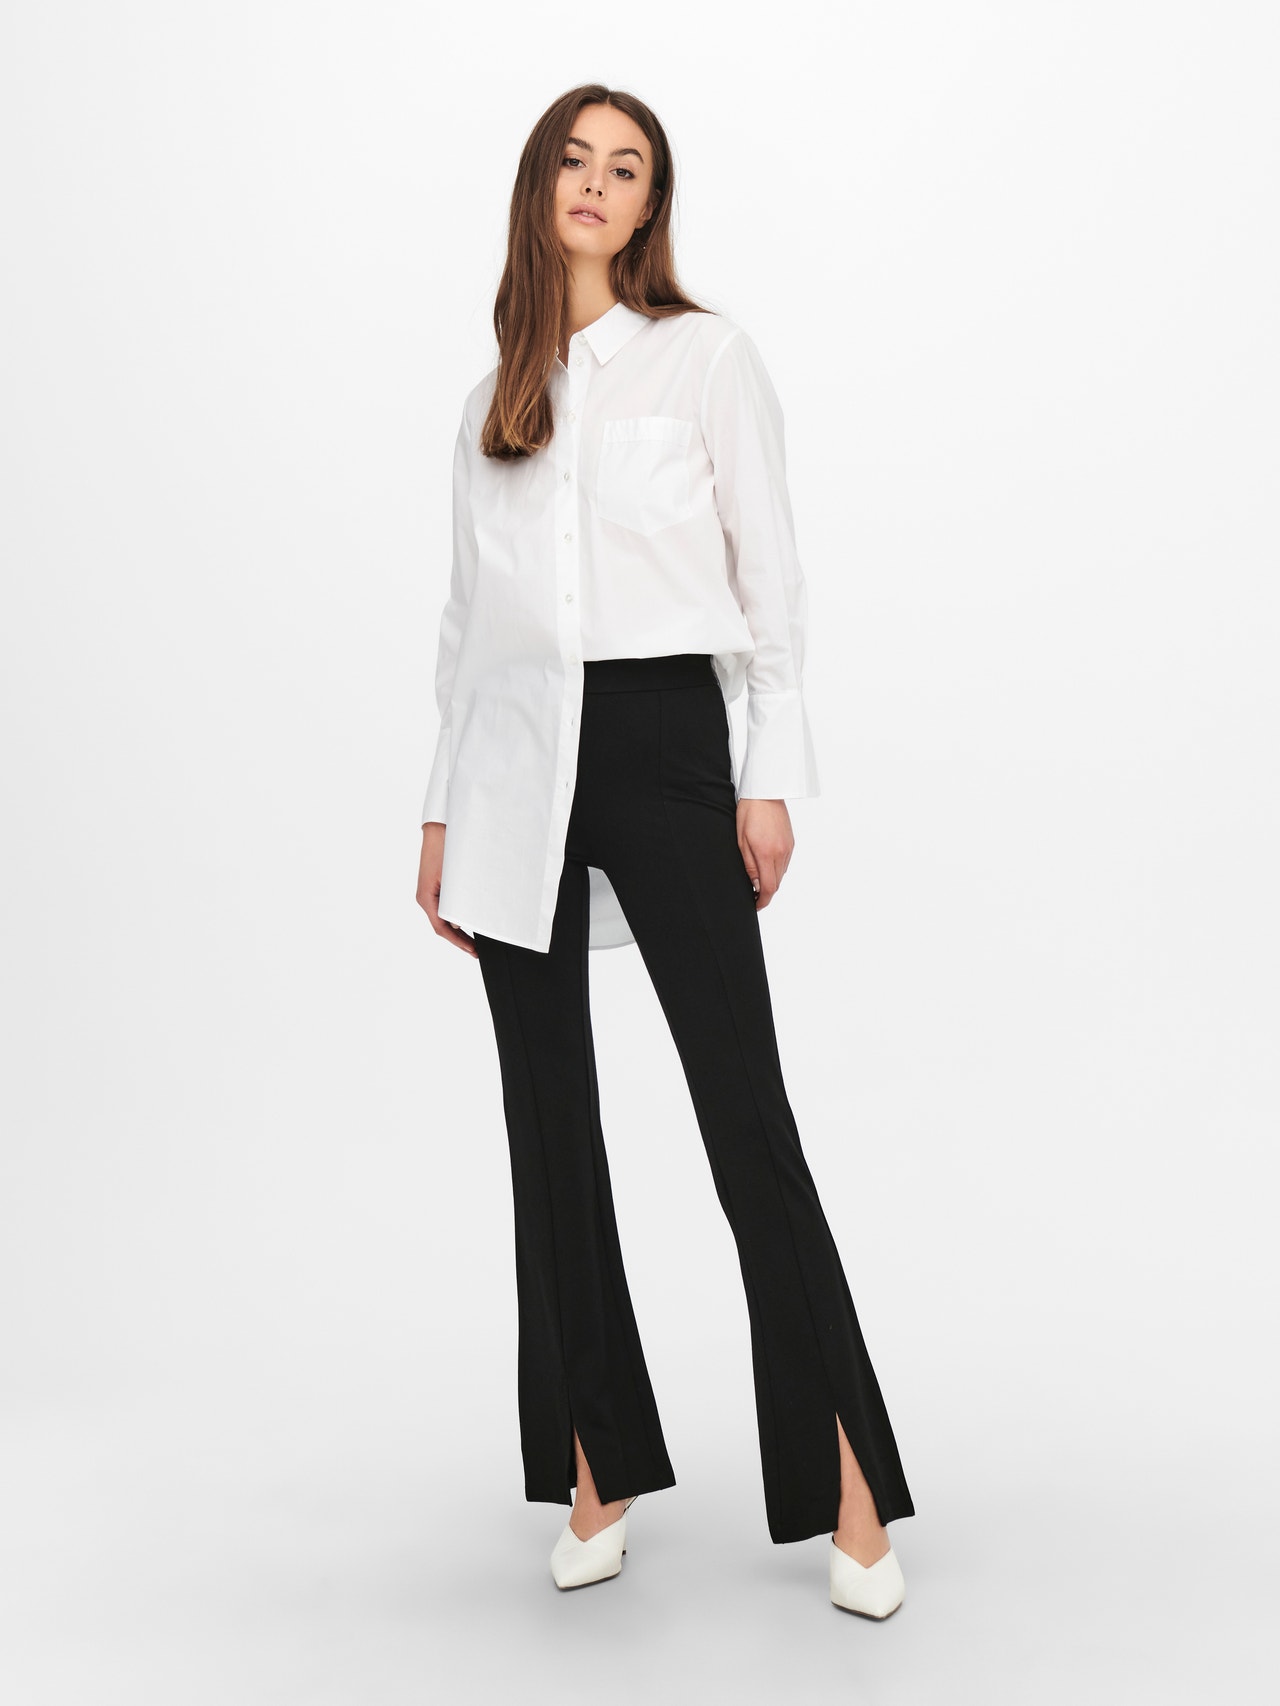 ONLY Flare slit Trousers -Black - 15234628